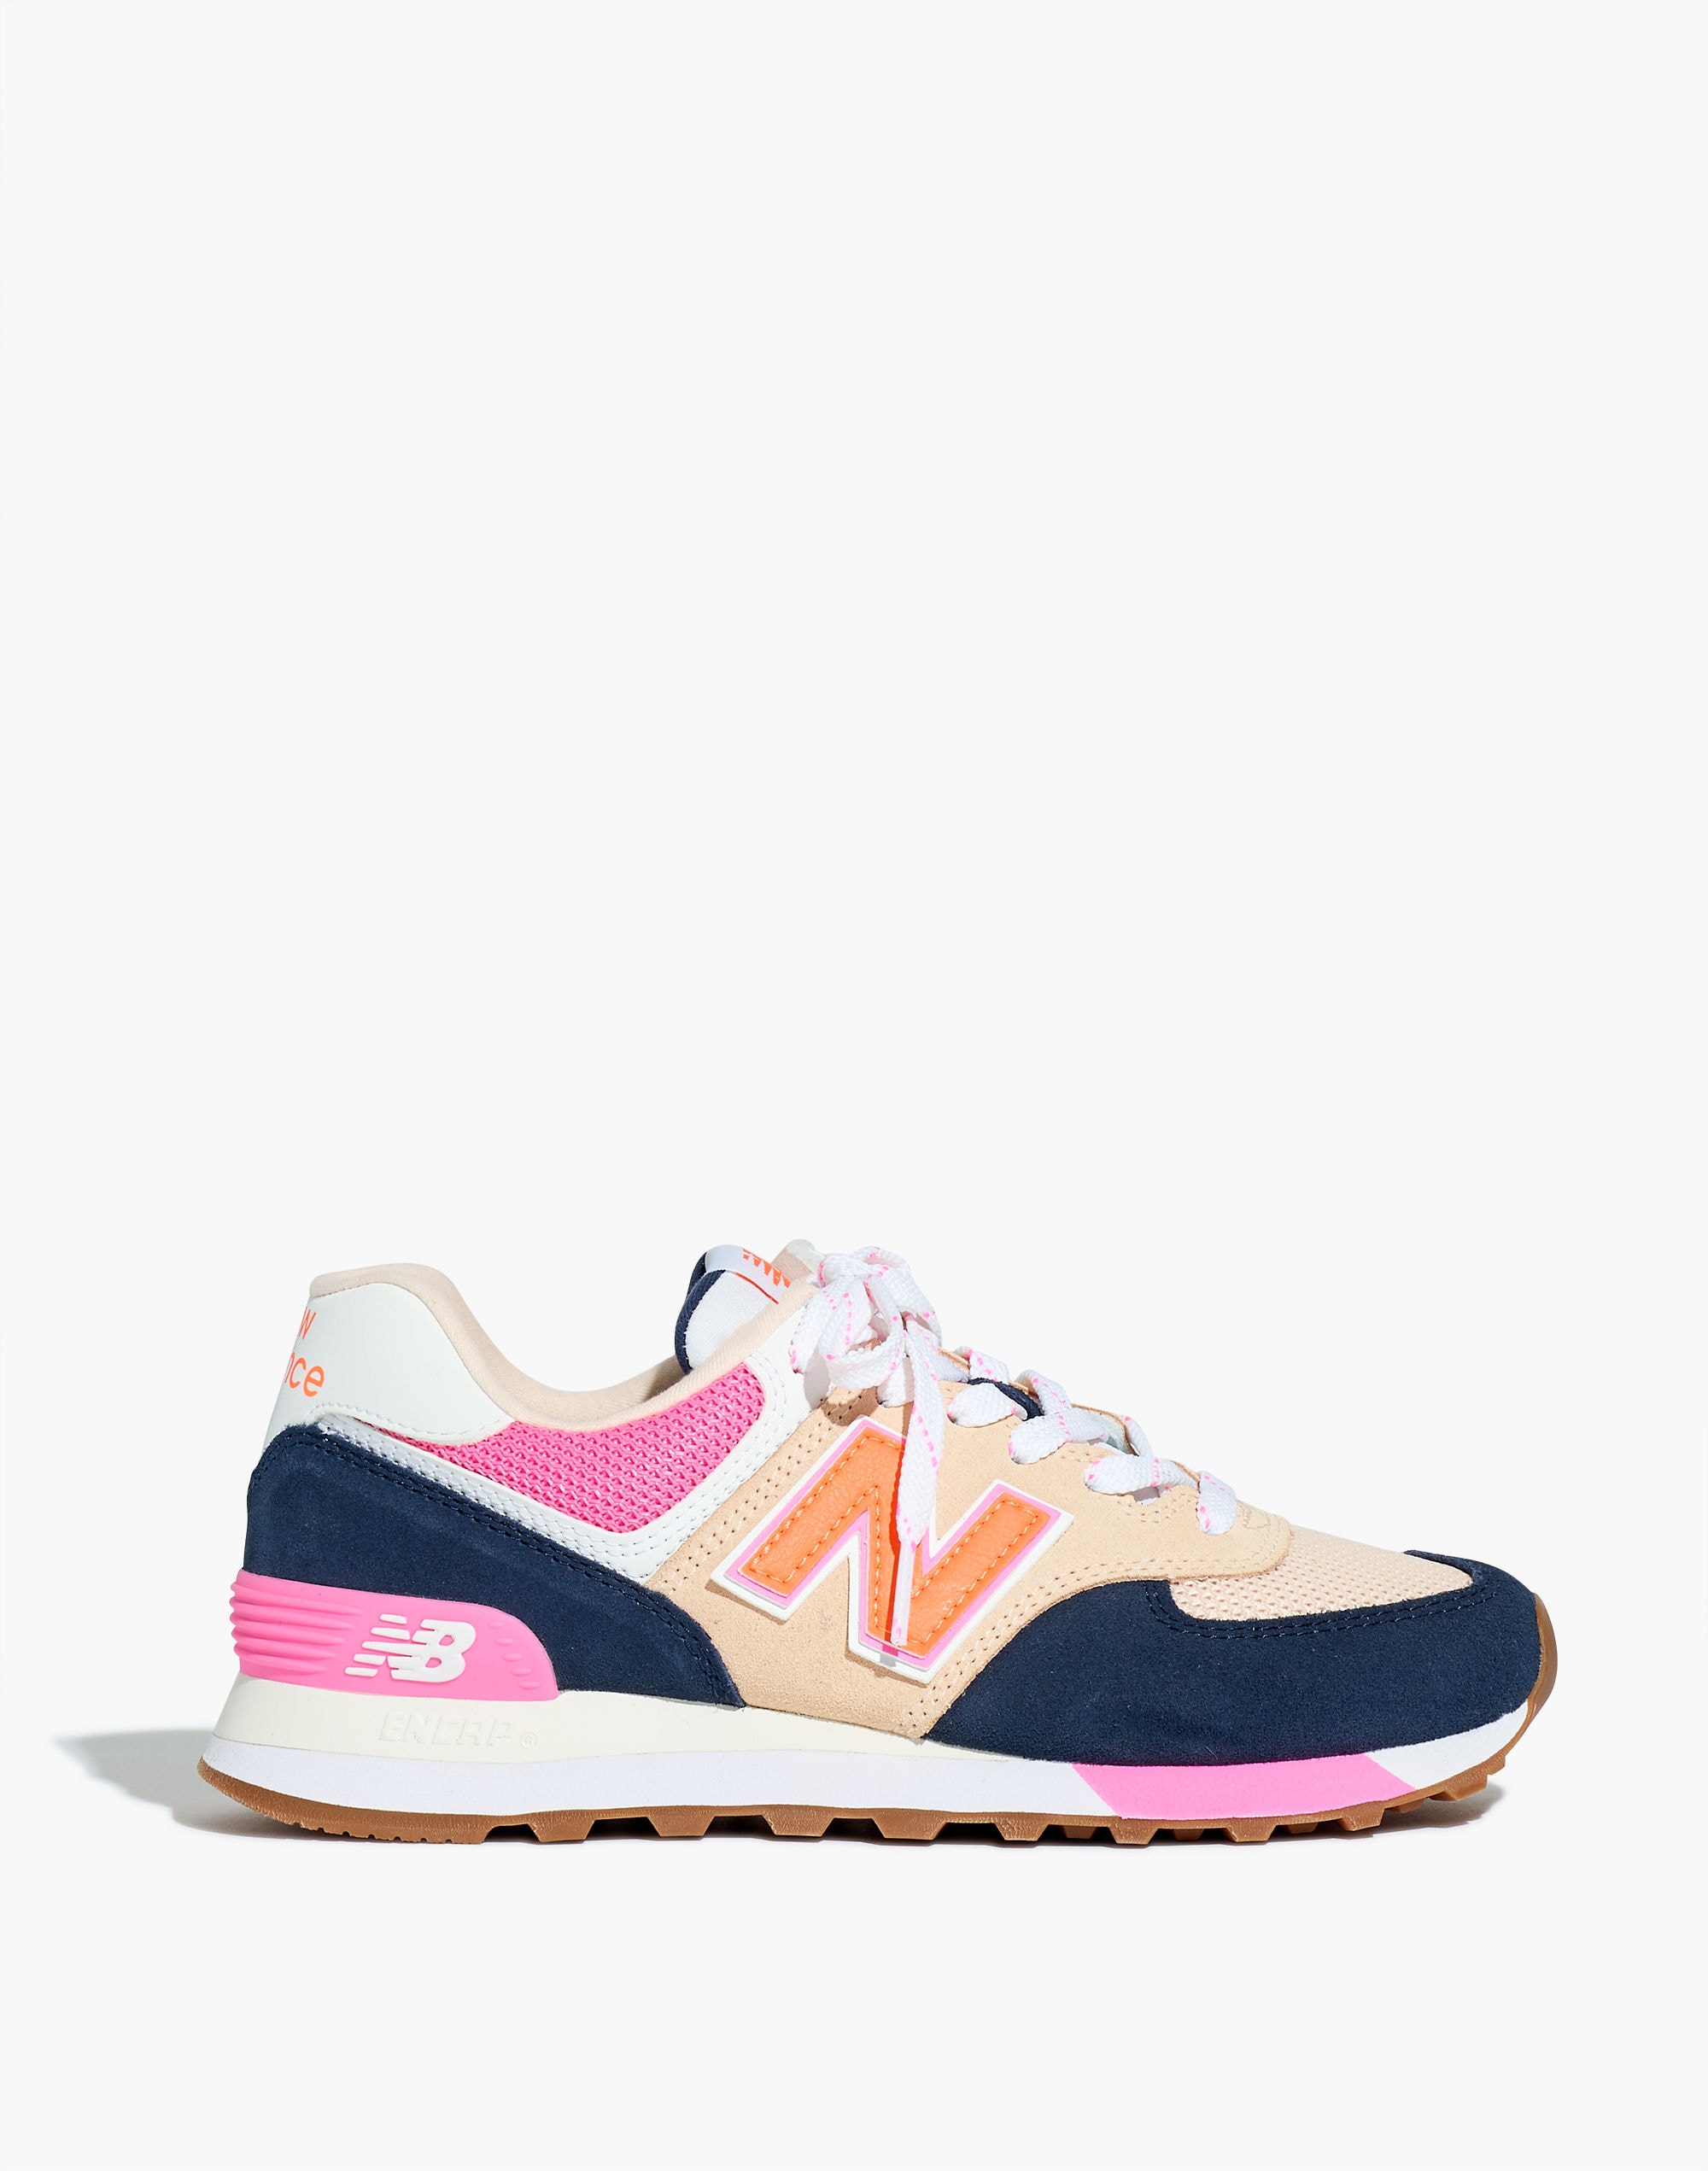 New Balance® Suede 574 Sneakers